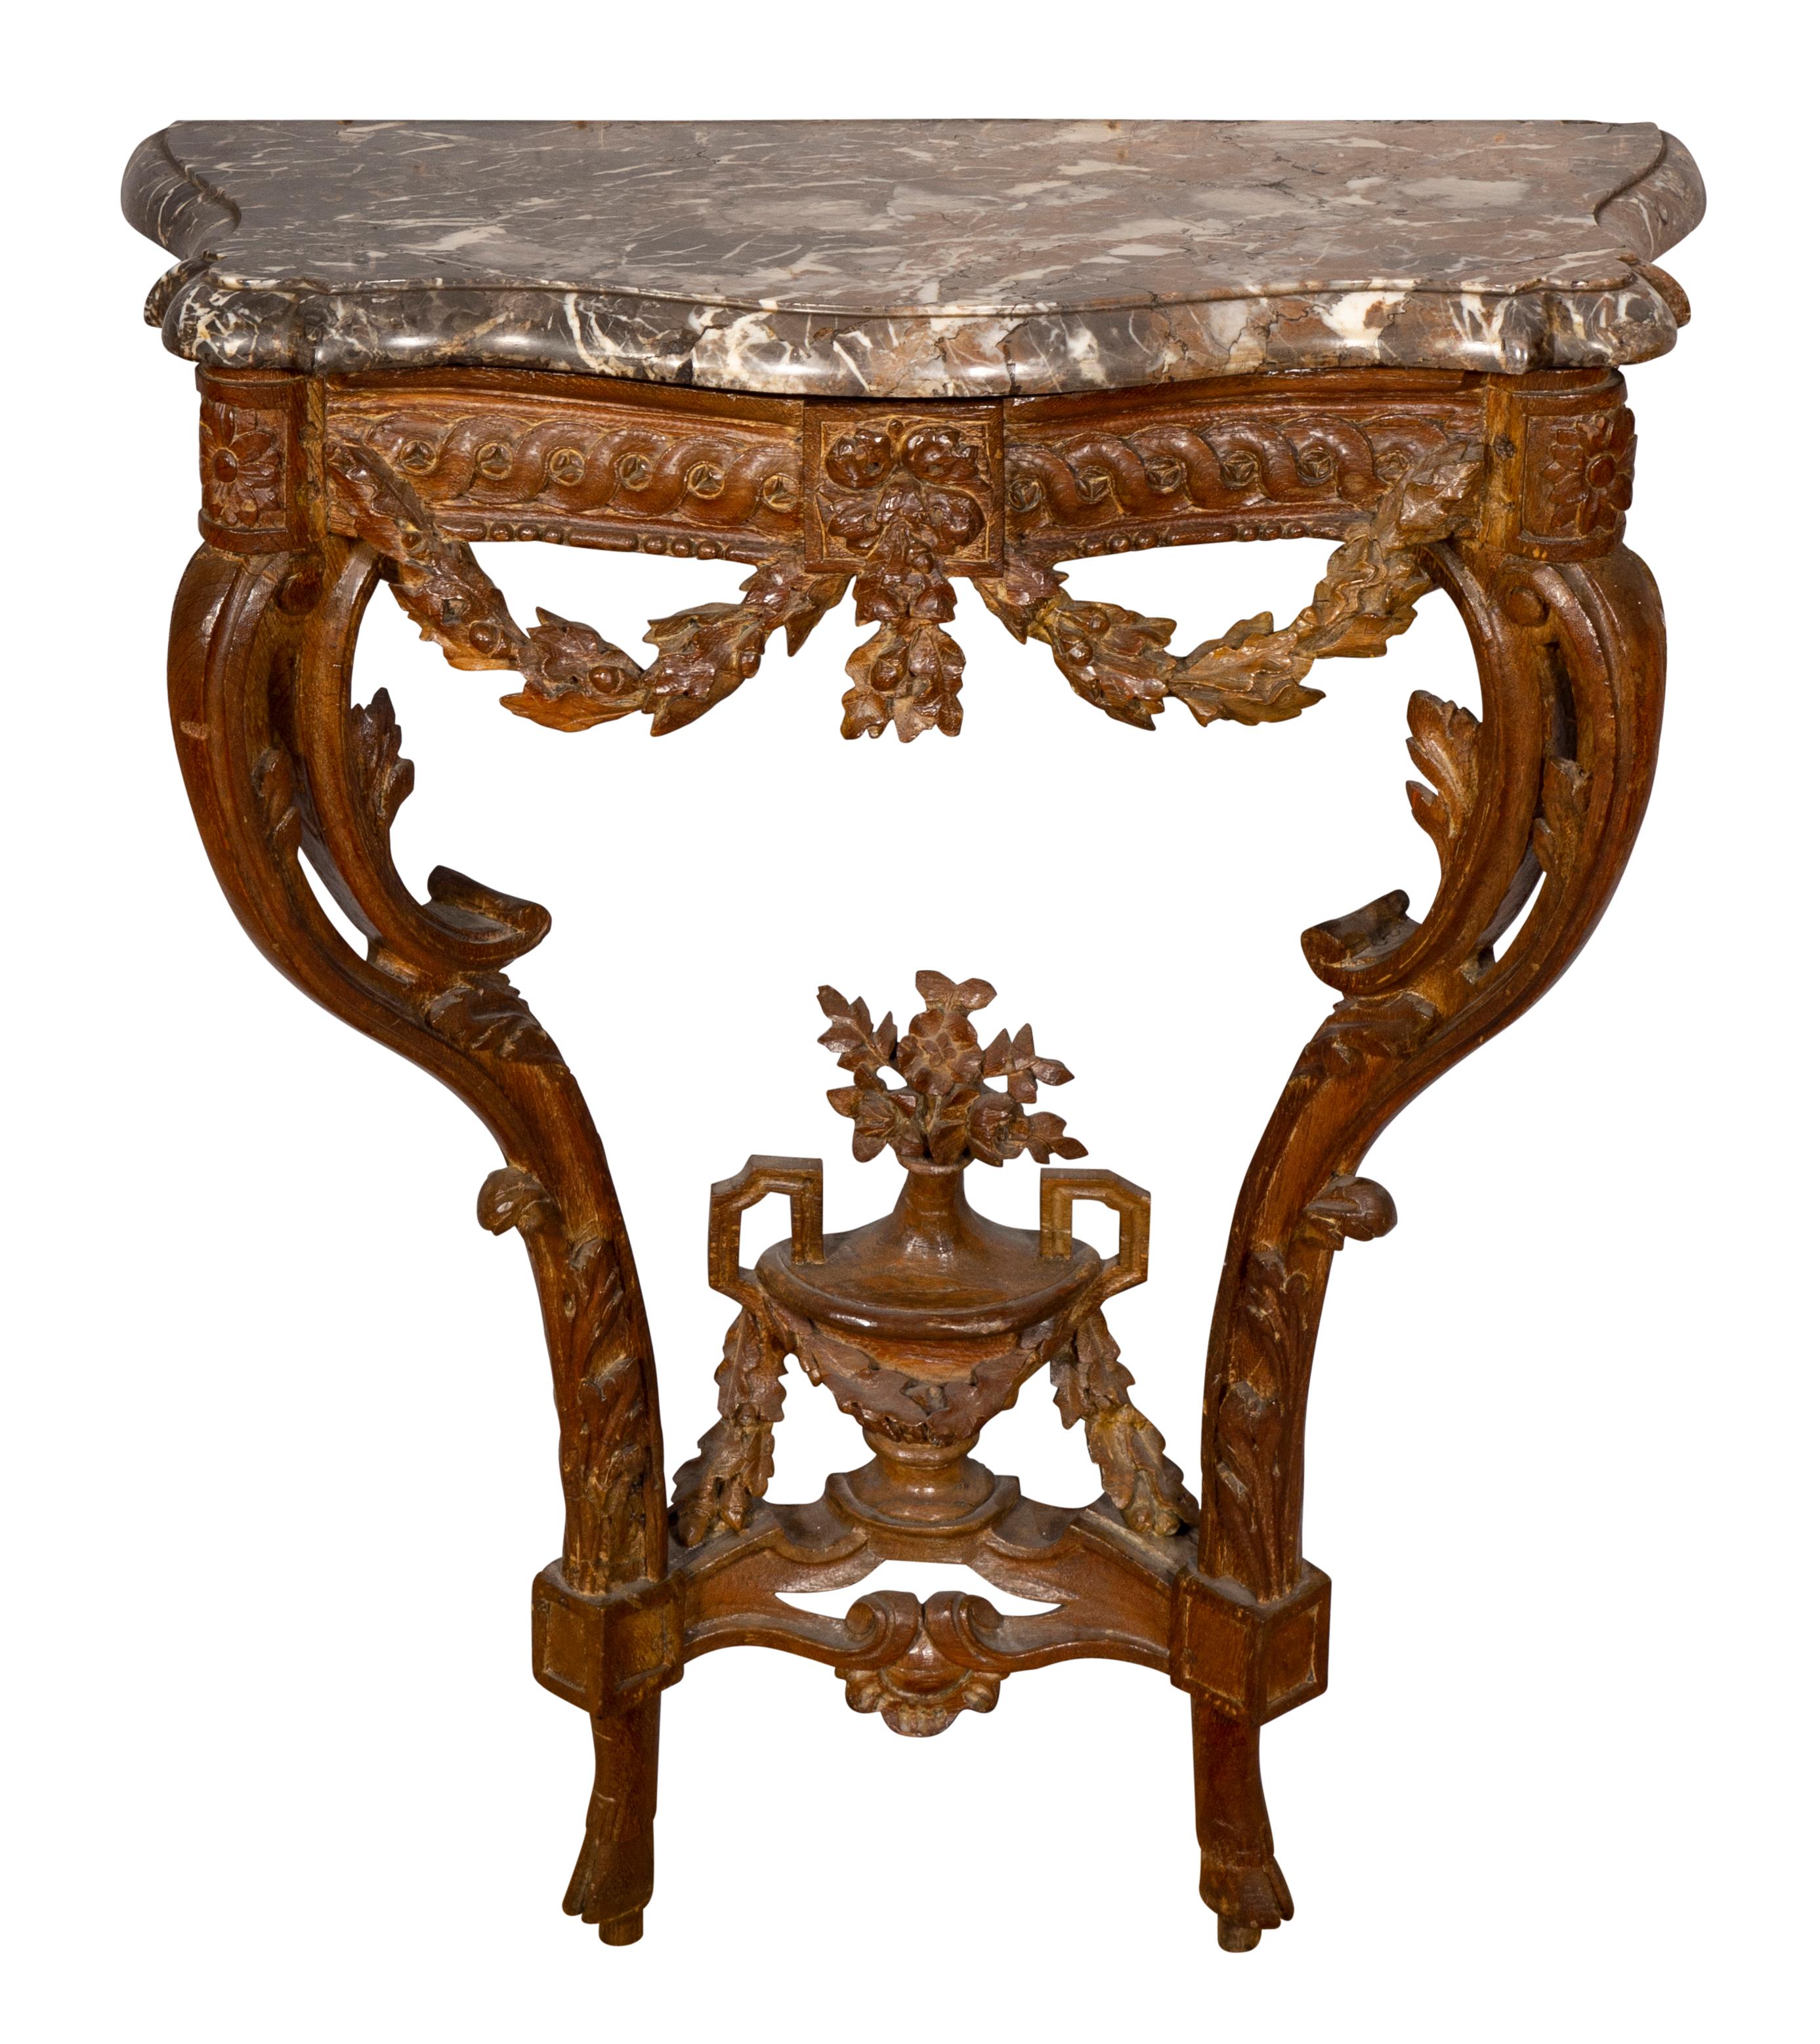 With original shaped marble top on a conforming base with guilloche carved frieze with carved oak leaf swags with a touch of gilding, curved legs with stretcher and central urn with floral finial.